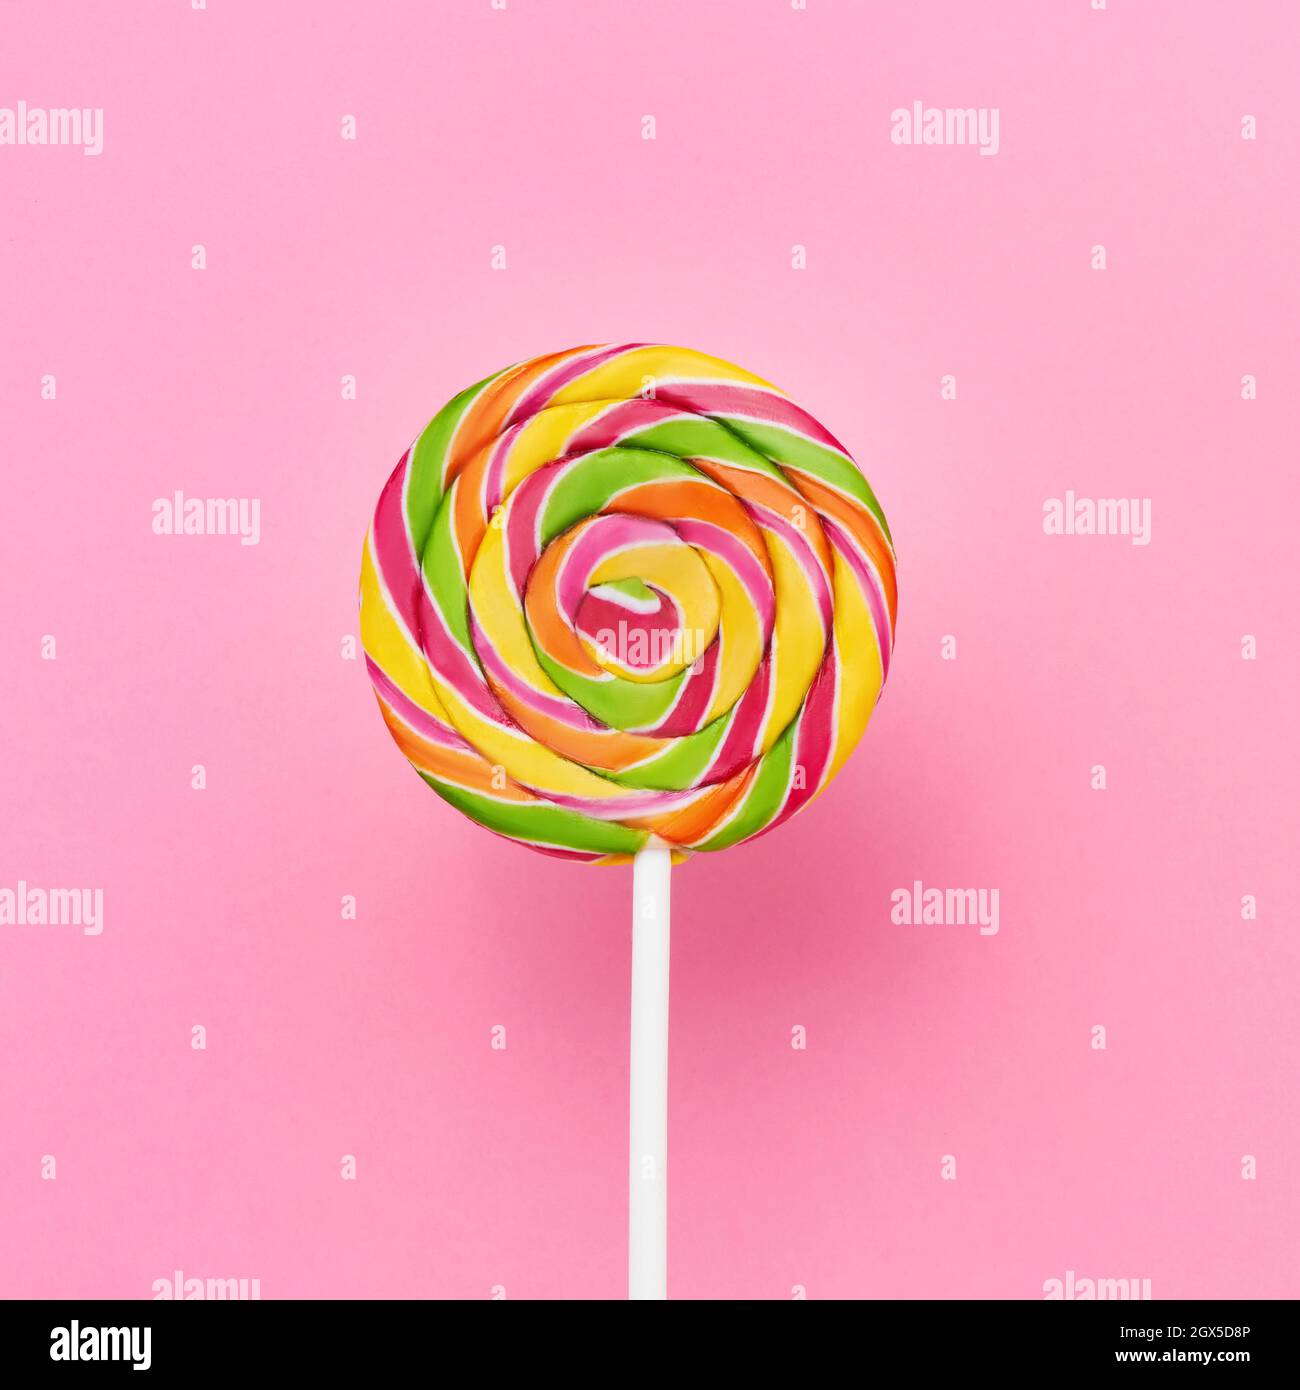 https://c8.alamy.com/comp/2GX5D8P/rainbow-lollipop-swirl-on-a-white-stick-over-pink-background-top-view-copy-space-for-text-2GX5D8P.jpg